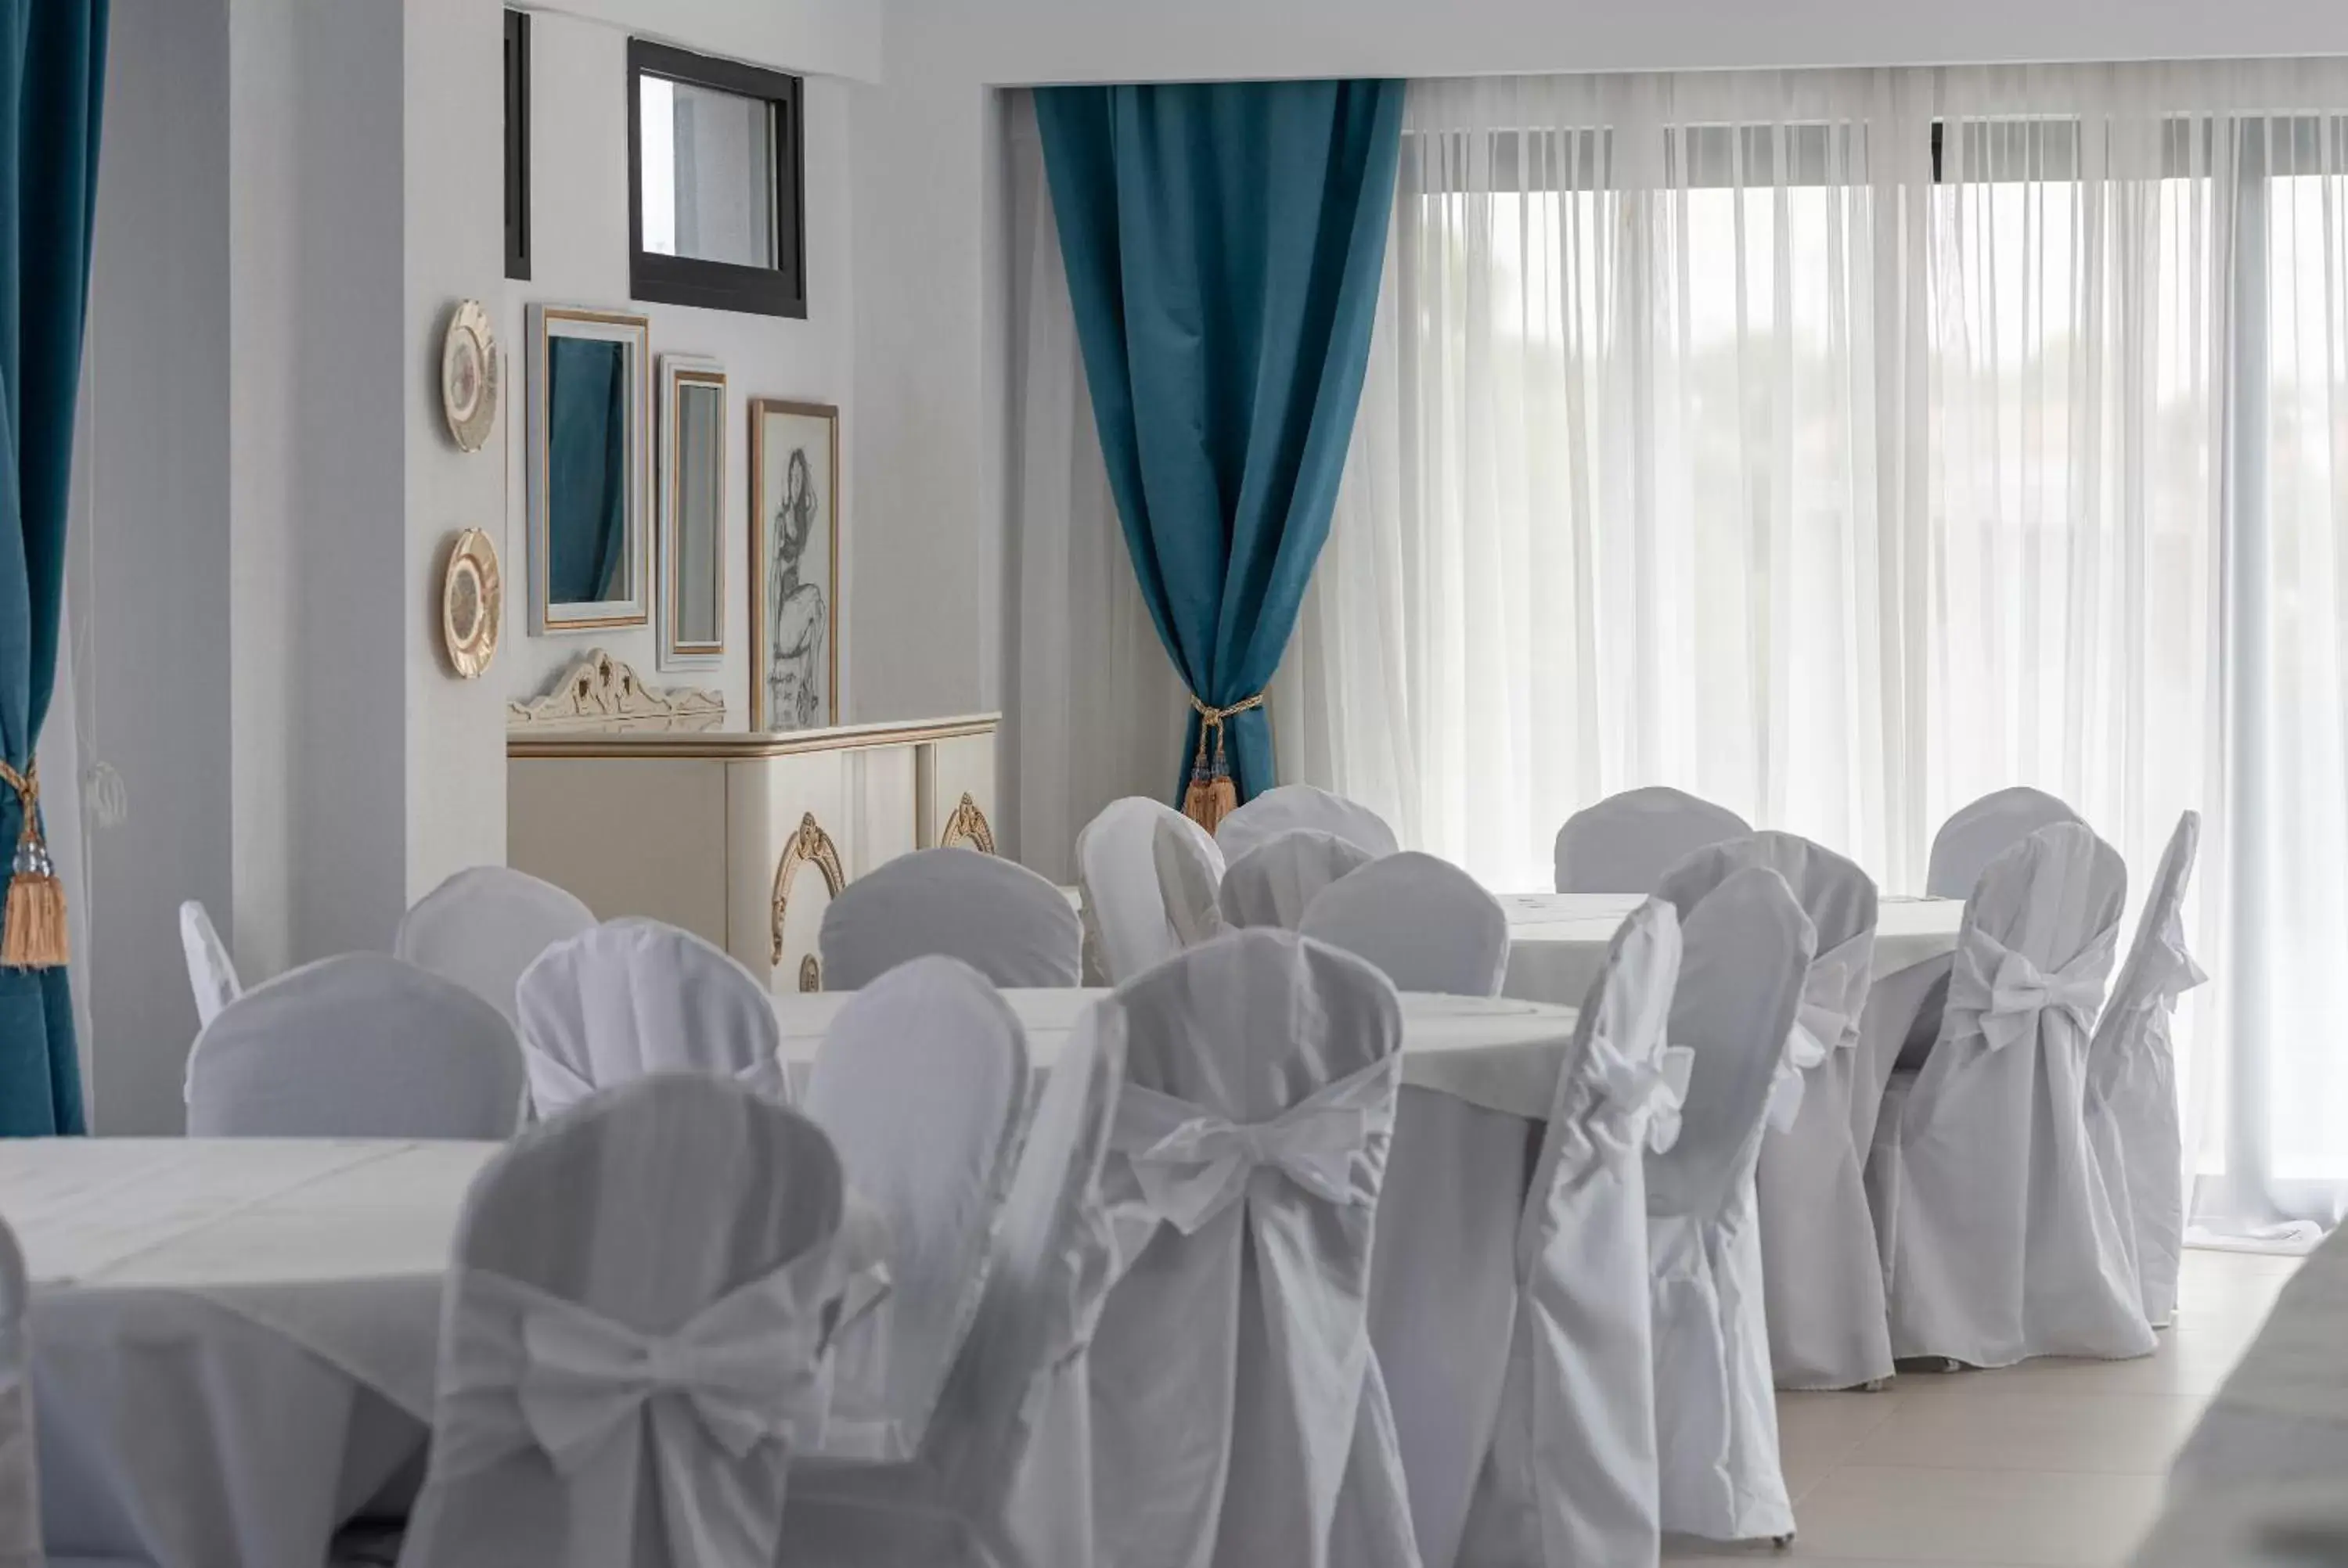 Dining area, Banquet Facilities in Light Blue Hotel